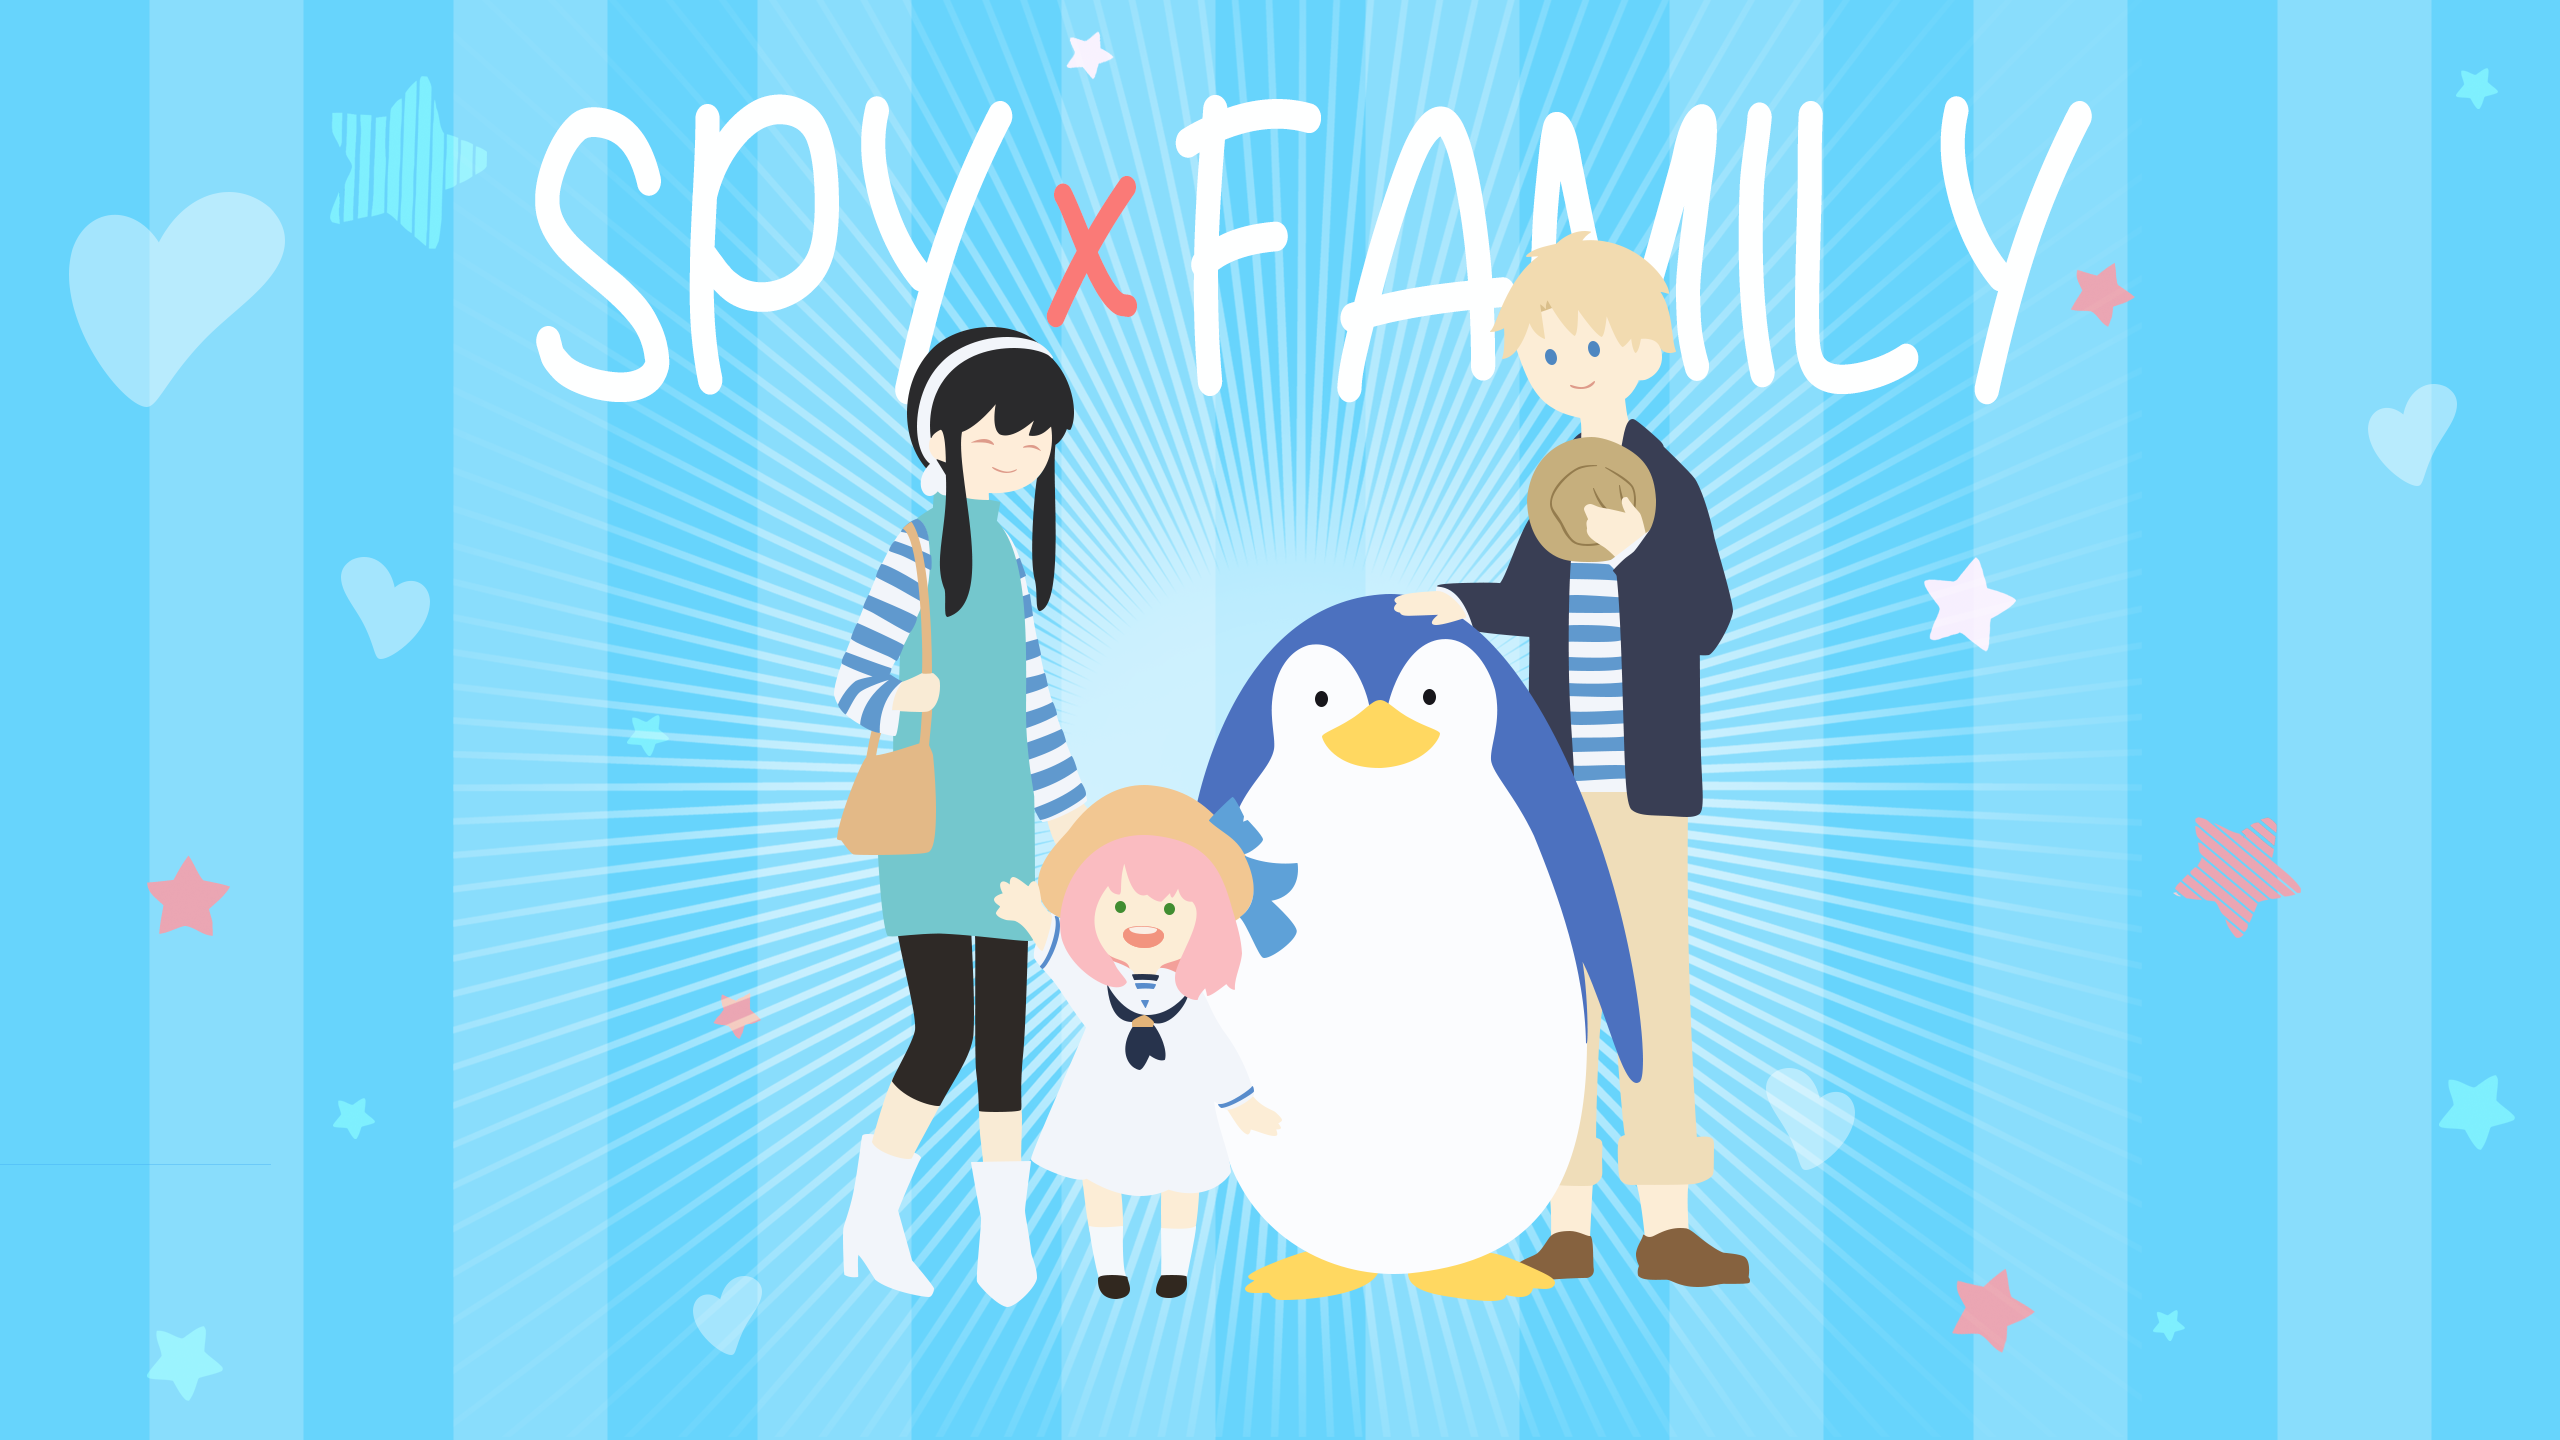 Anime 2560x1440 Spy x Family anime boys anime girls Loid Forger Yor Forger Anya Forger minimalism stars heart penguins stuffed animal smiling simple background hat purse looking at viewer waving title